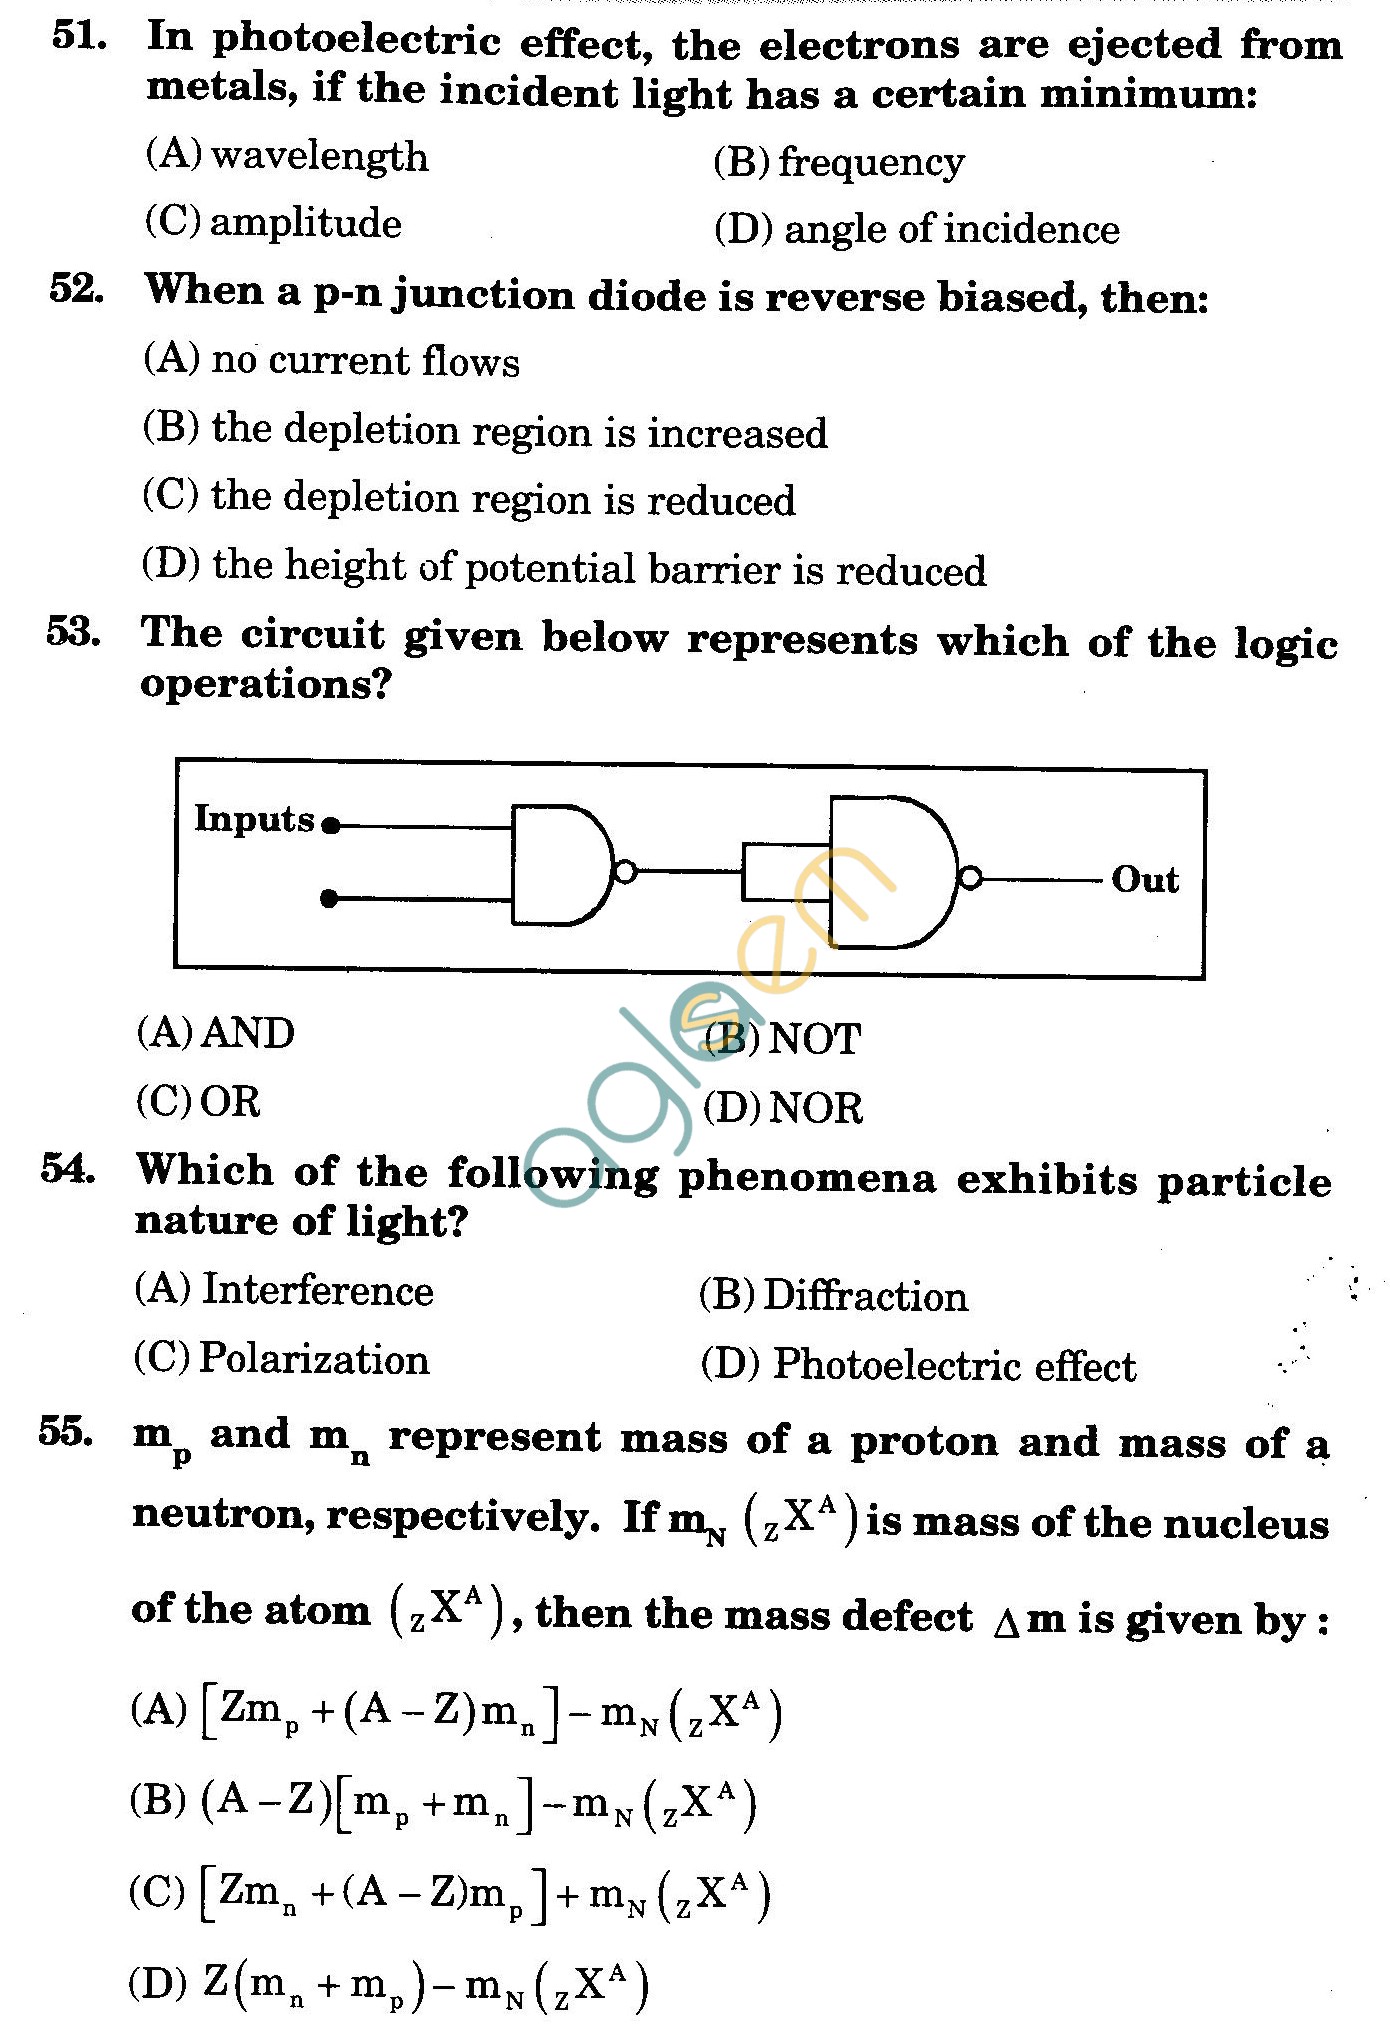 NSTSE 2009 Class XII PCB Question Paper with Answers - Physics